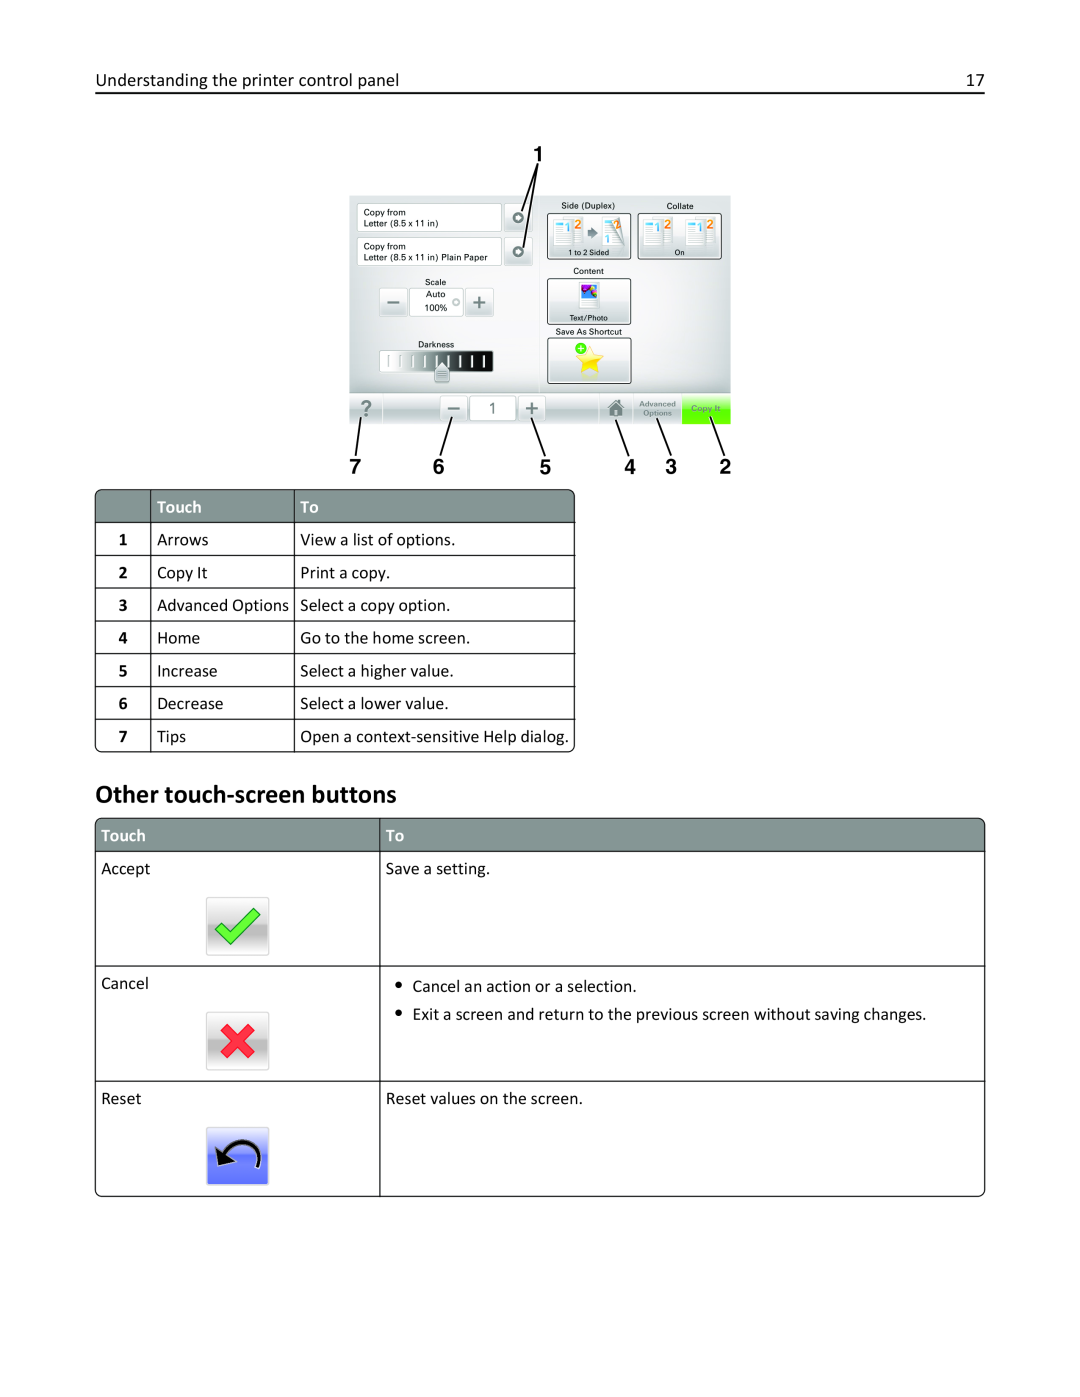 Lexmark 436 manual Other touch-screen buttons, Arrows, View a list of options, Copy It, Print a copy 